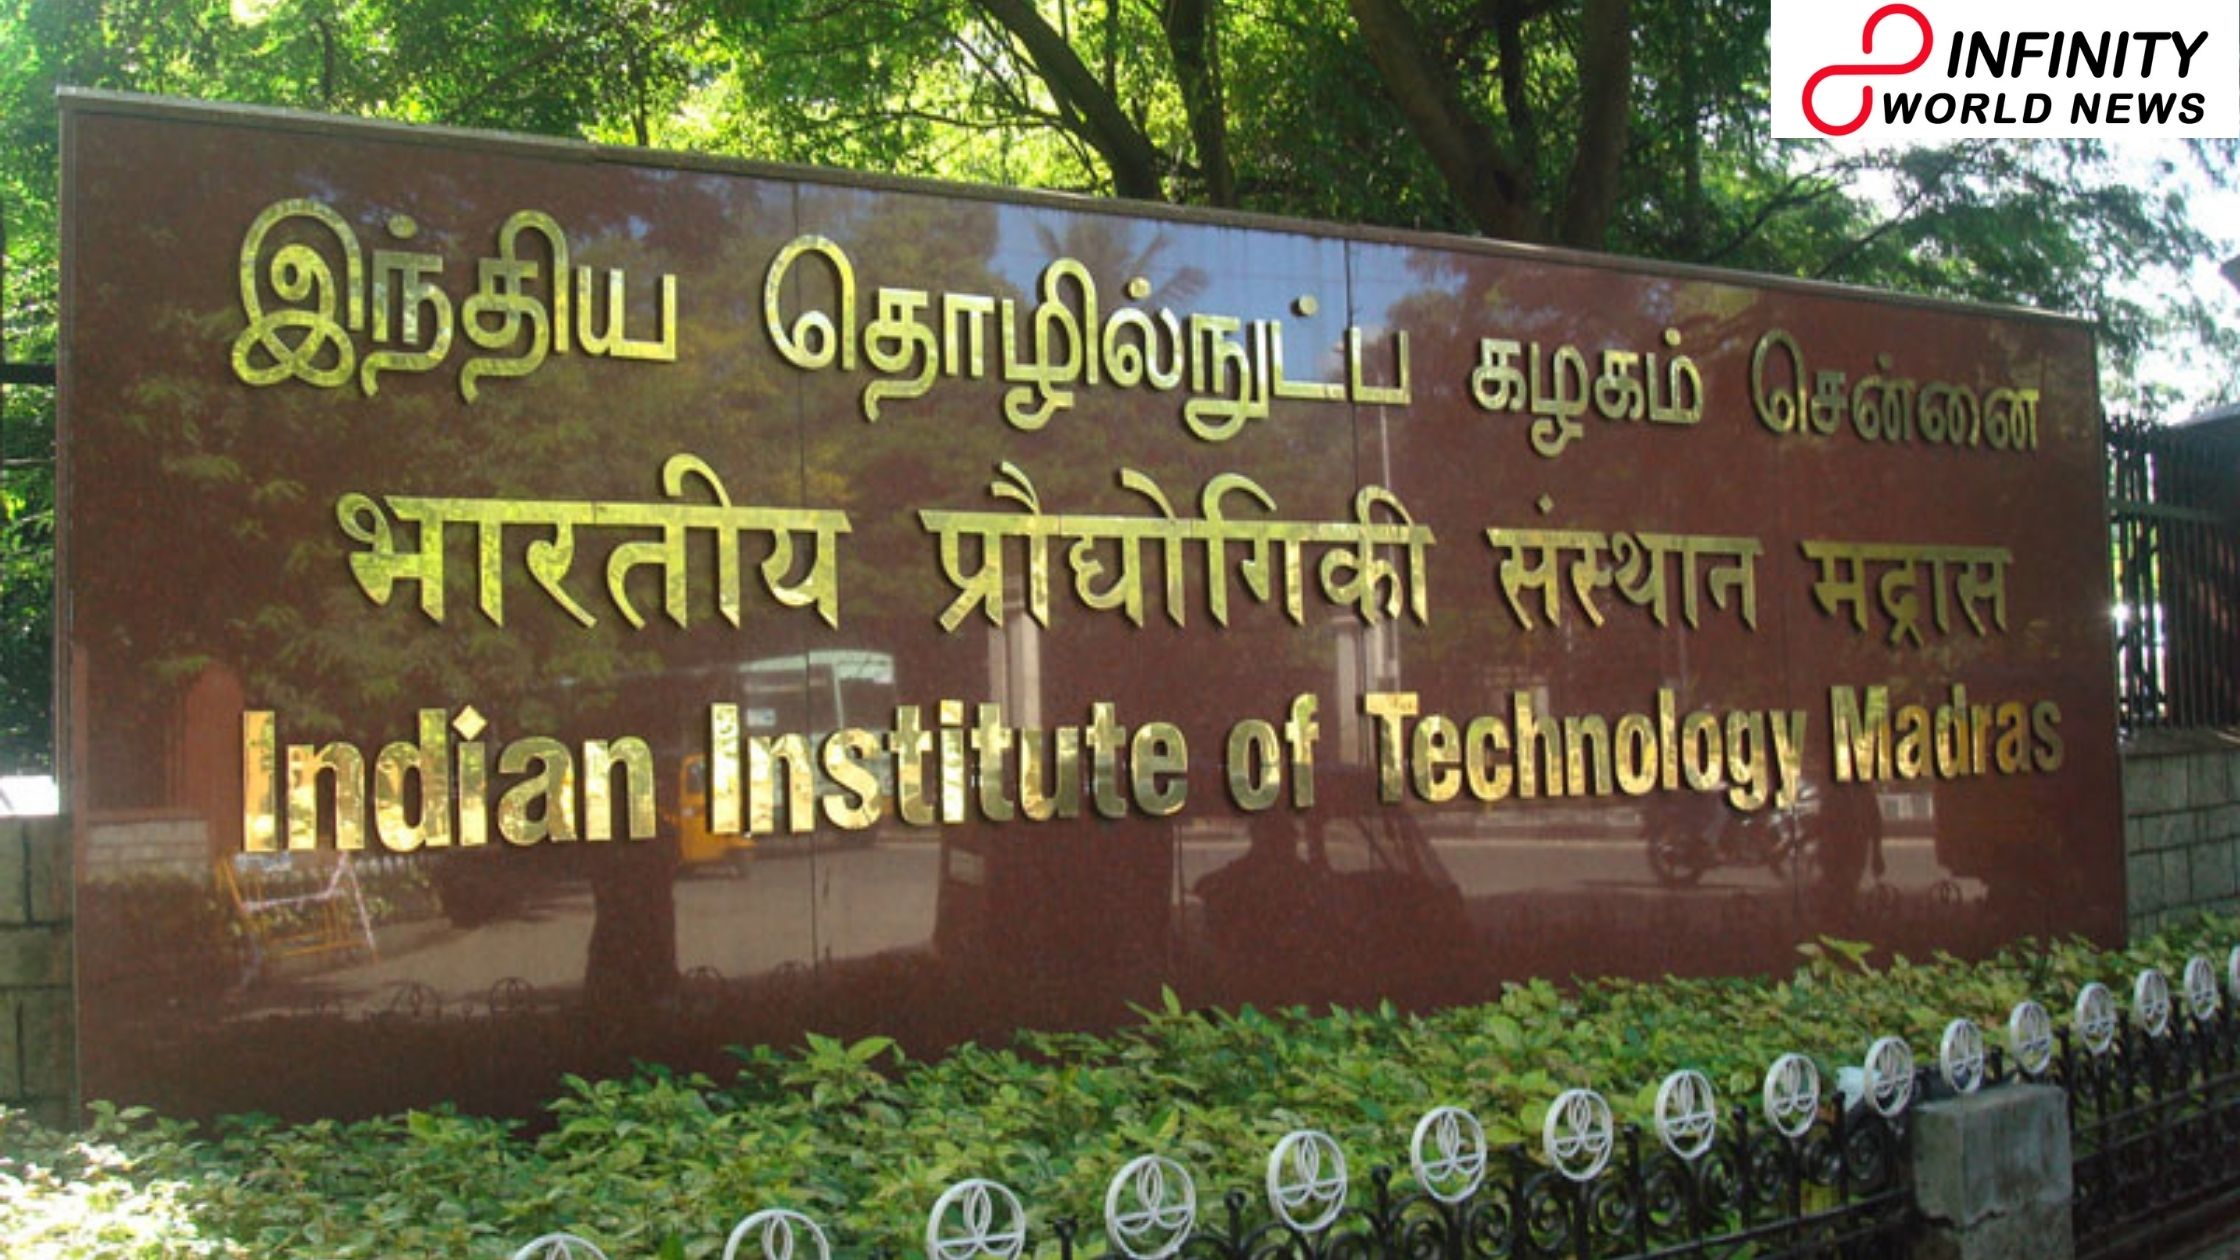 IIT Madras Alumni affiliation discloses how to look for circumstances in Covid-19